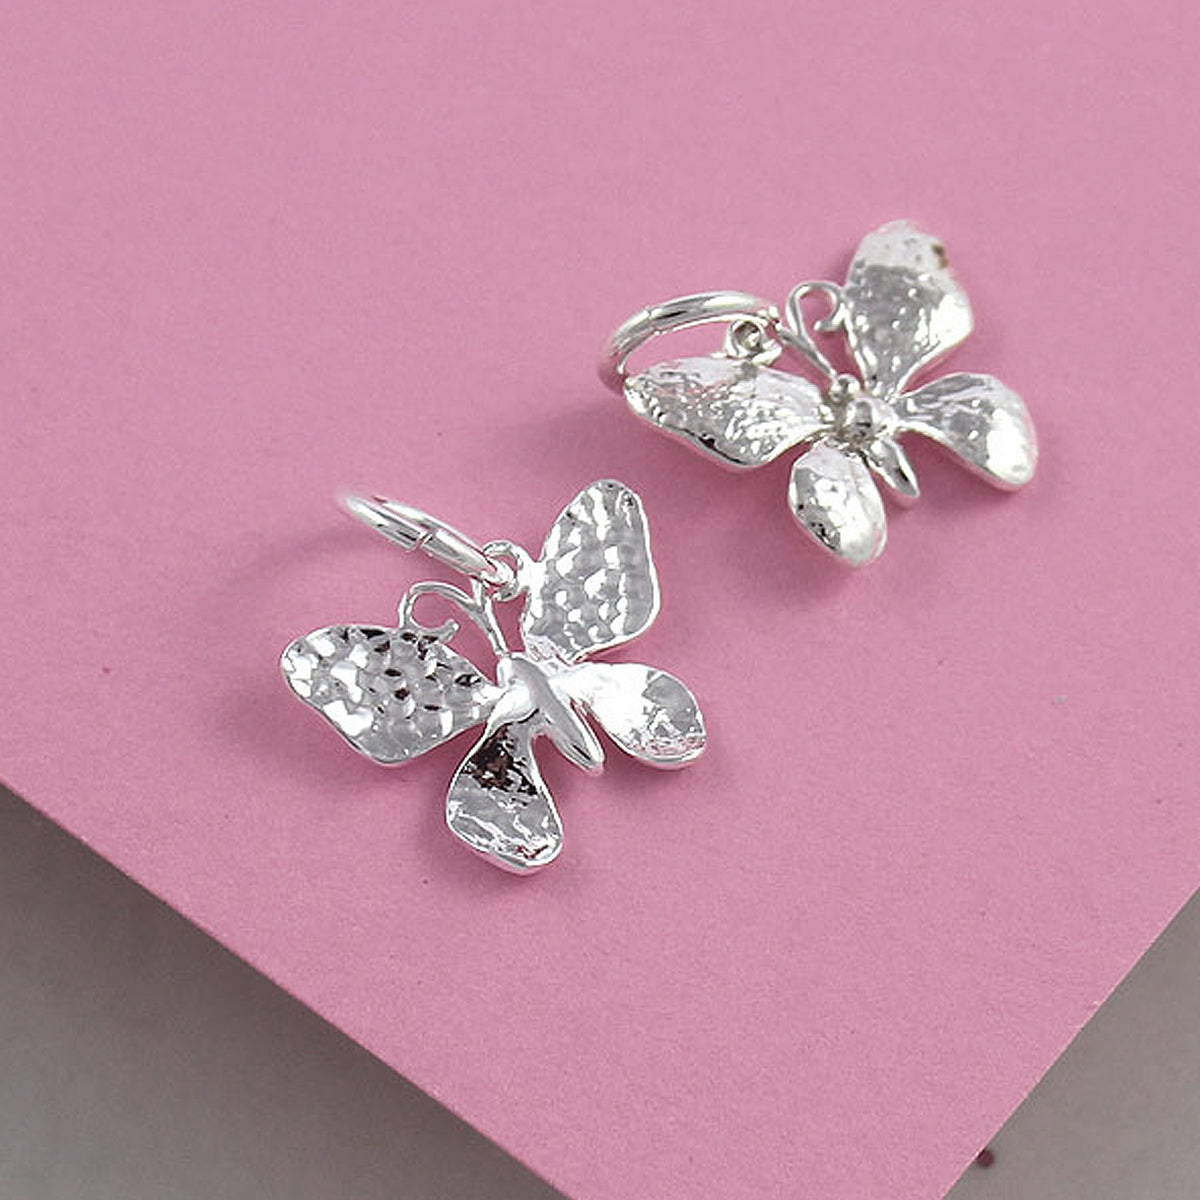 Butterfly Silver Charm For Bracelets and Necklaces from Scarlett Jewellery UK